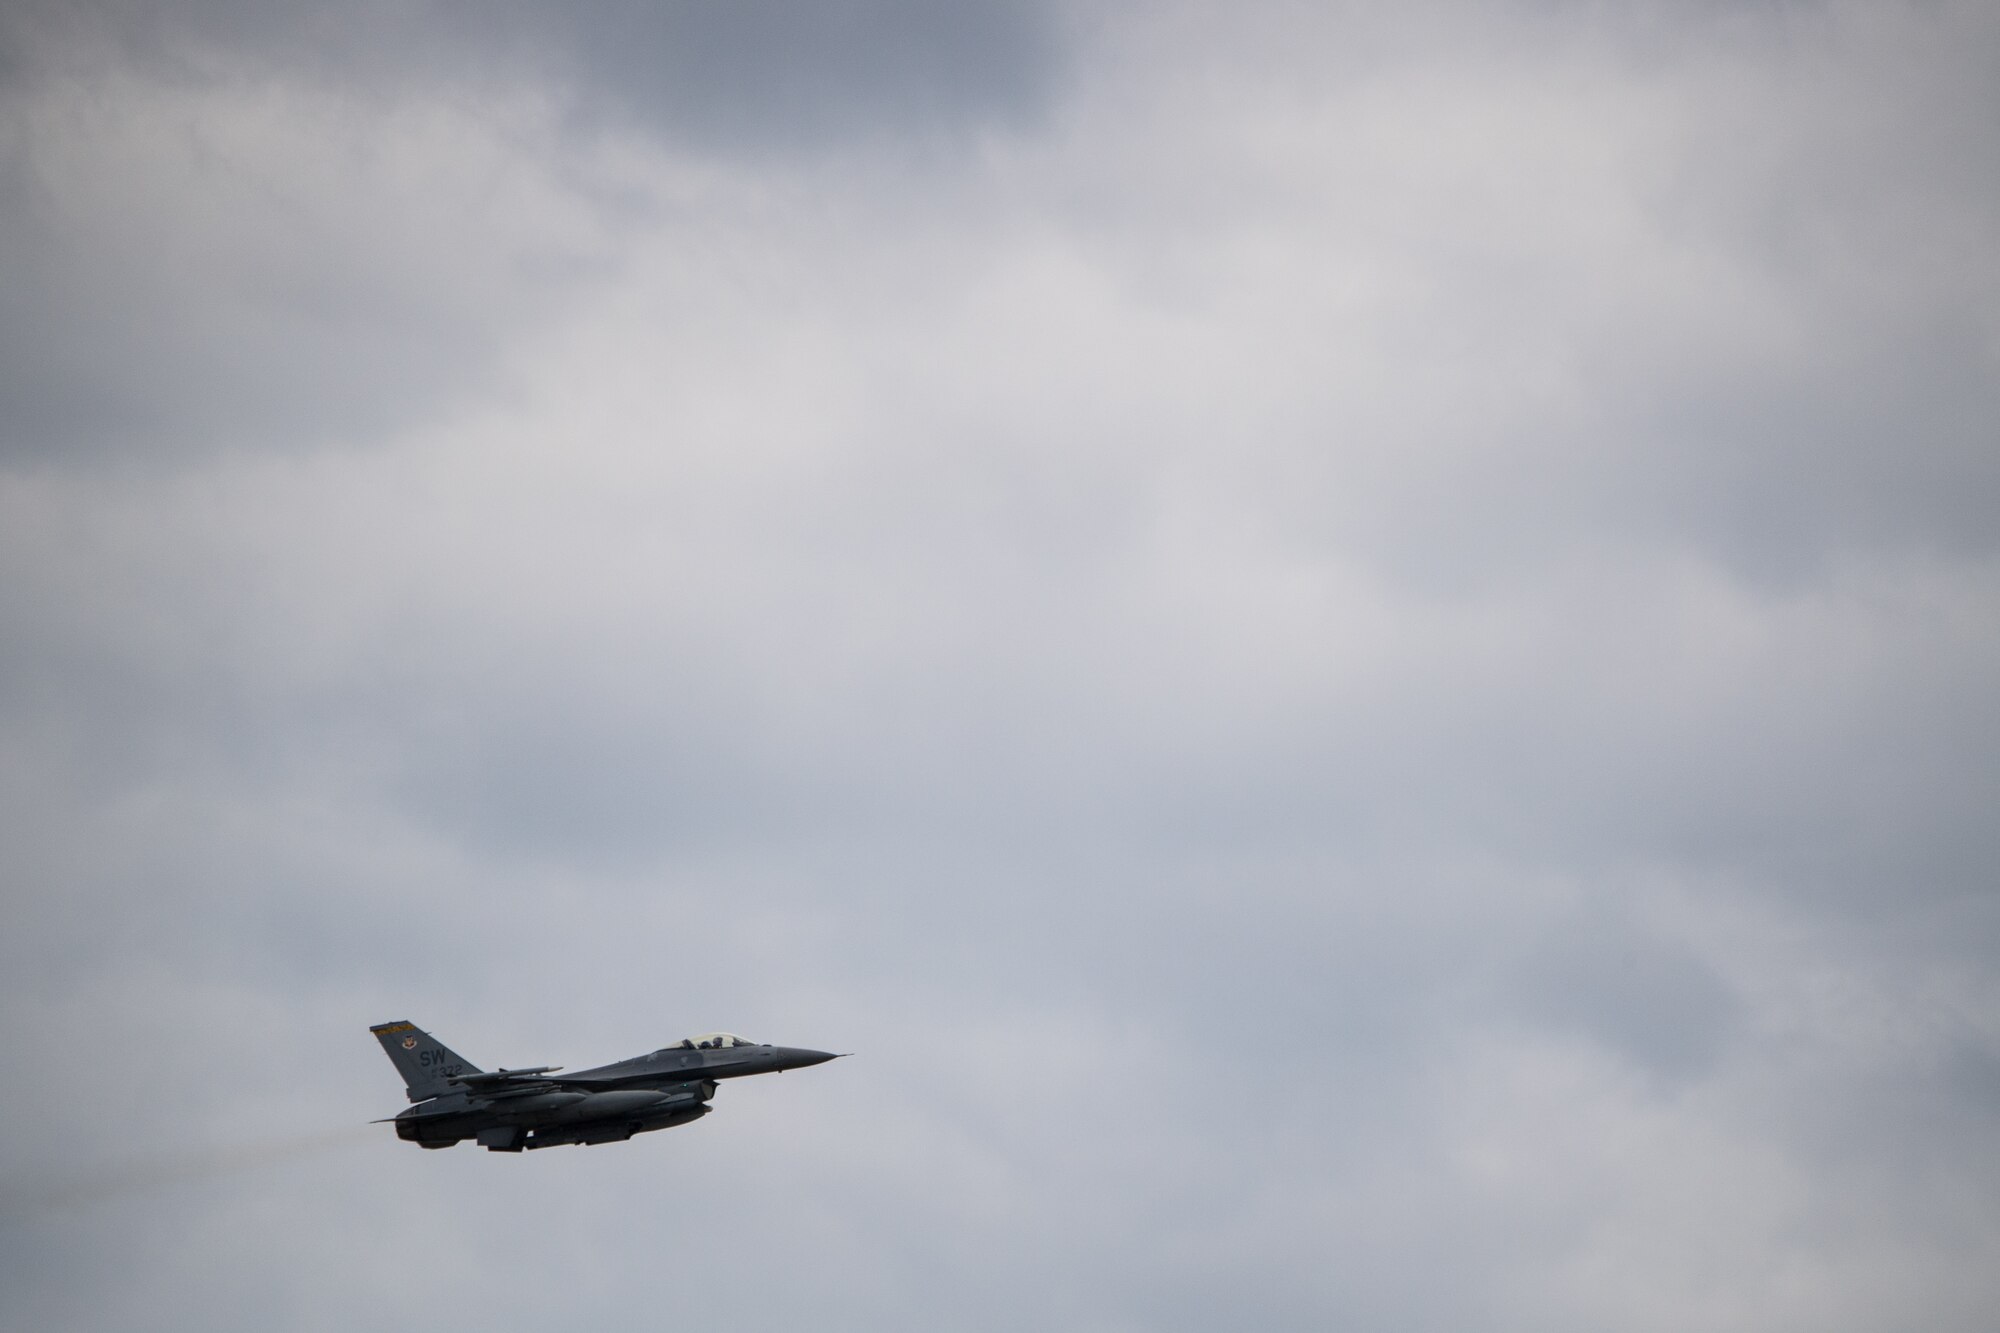 An F-16 Fighting Falcon from Shaw Air Force Base, S.C., takes flight at Barksdale Air Force Base, La., Oct. 12, 2018. The aircraft evacuated to Barksdale to avoid possible damage from Hurricane Michael. (U.S. Air Force photo by Airman 1st Class Lillian Miller)